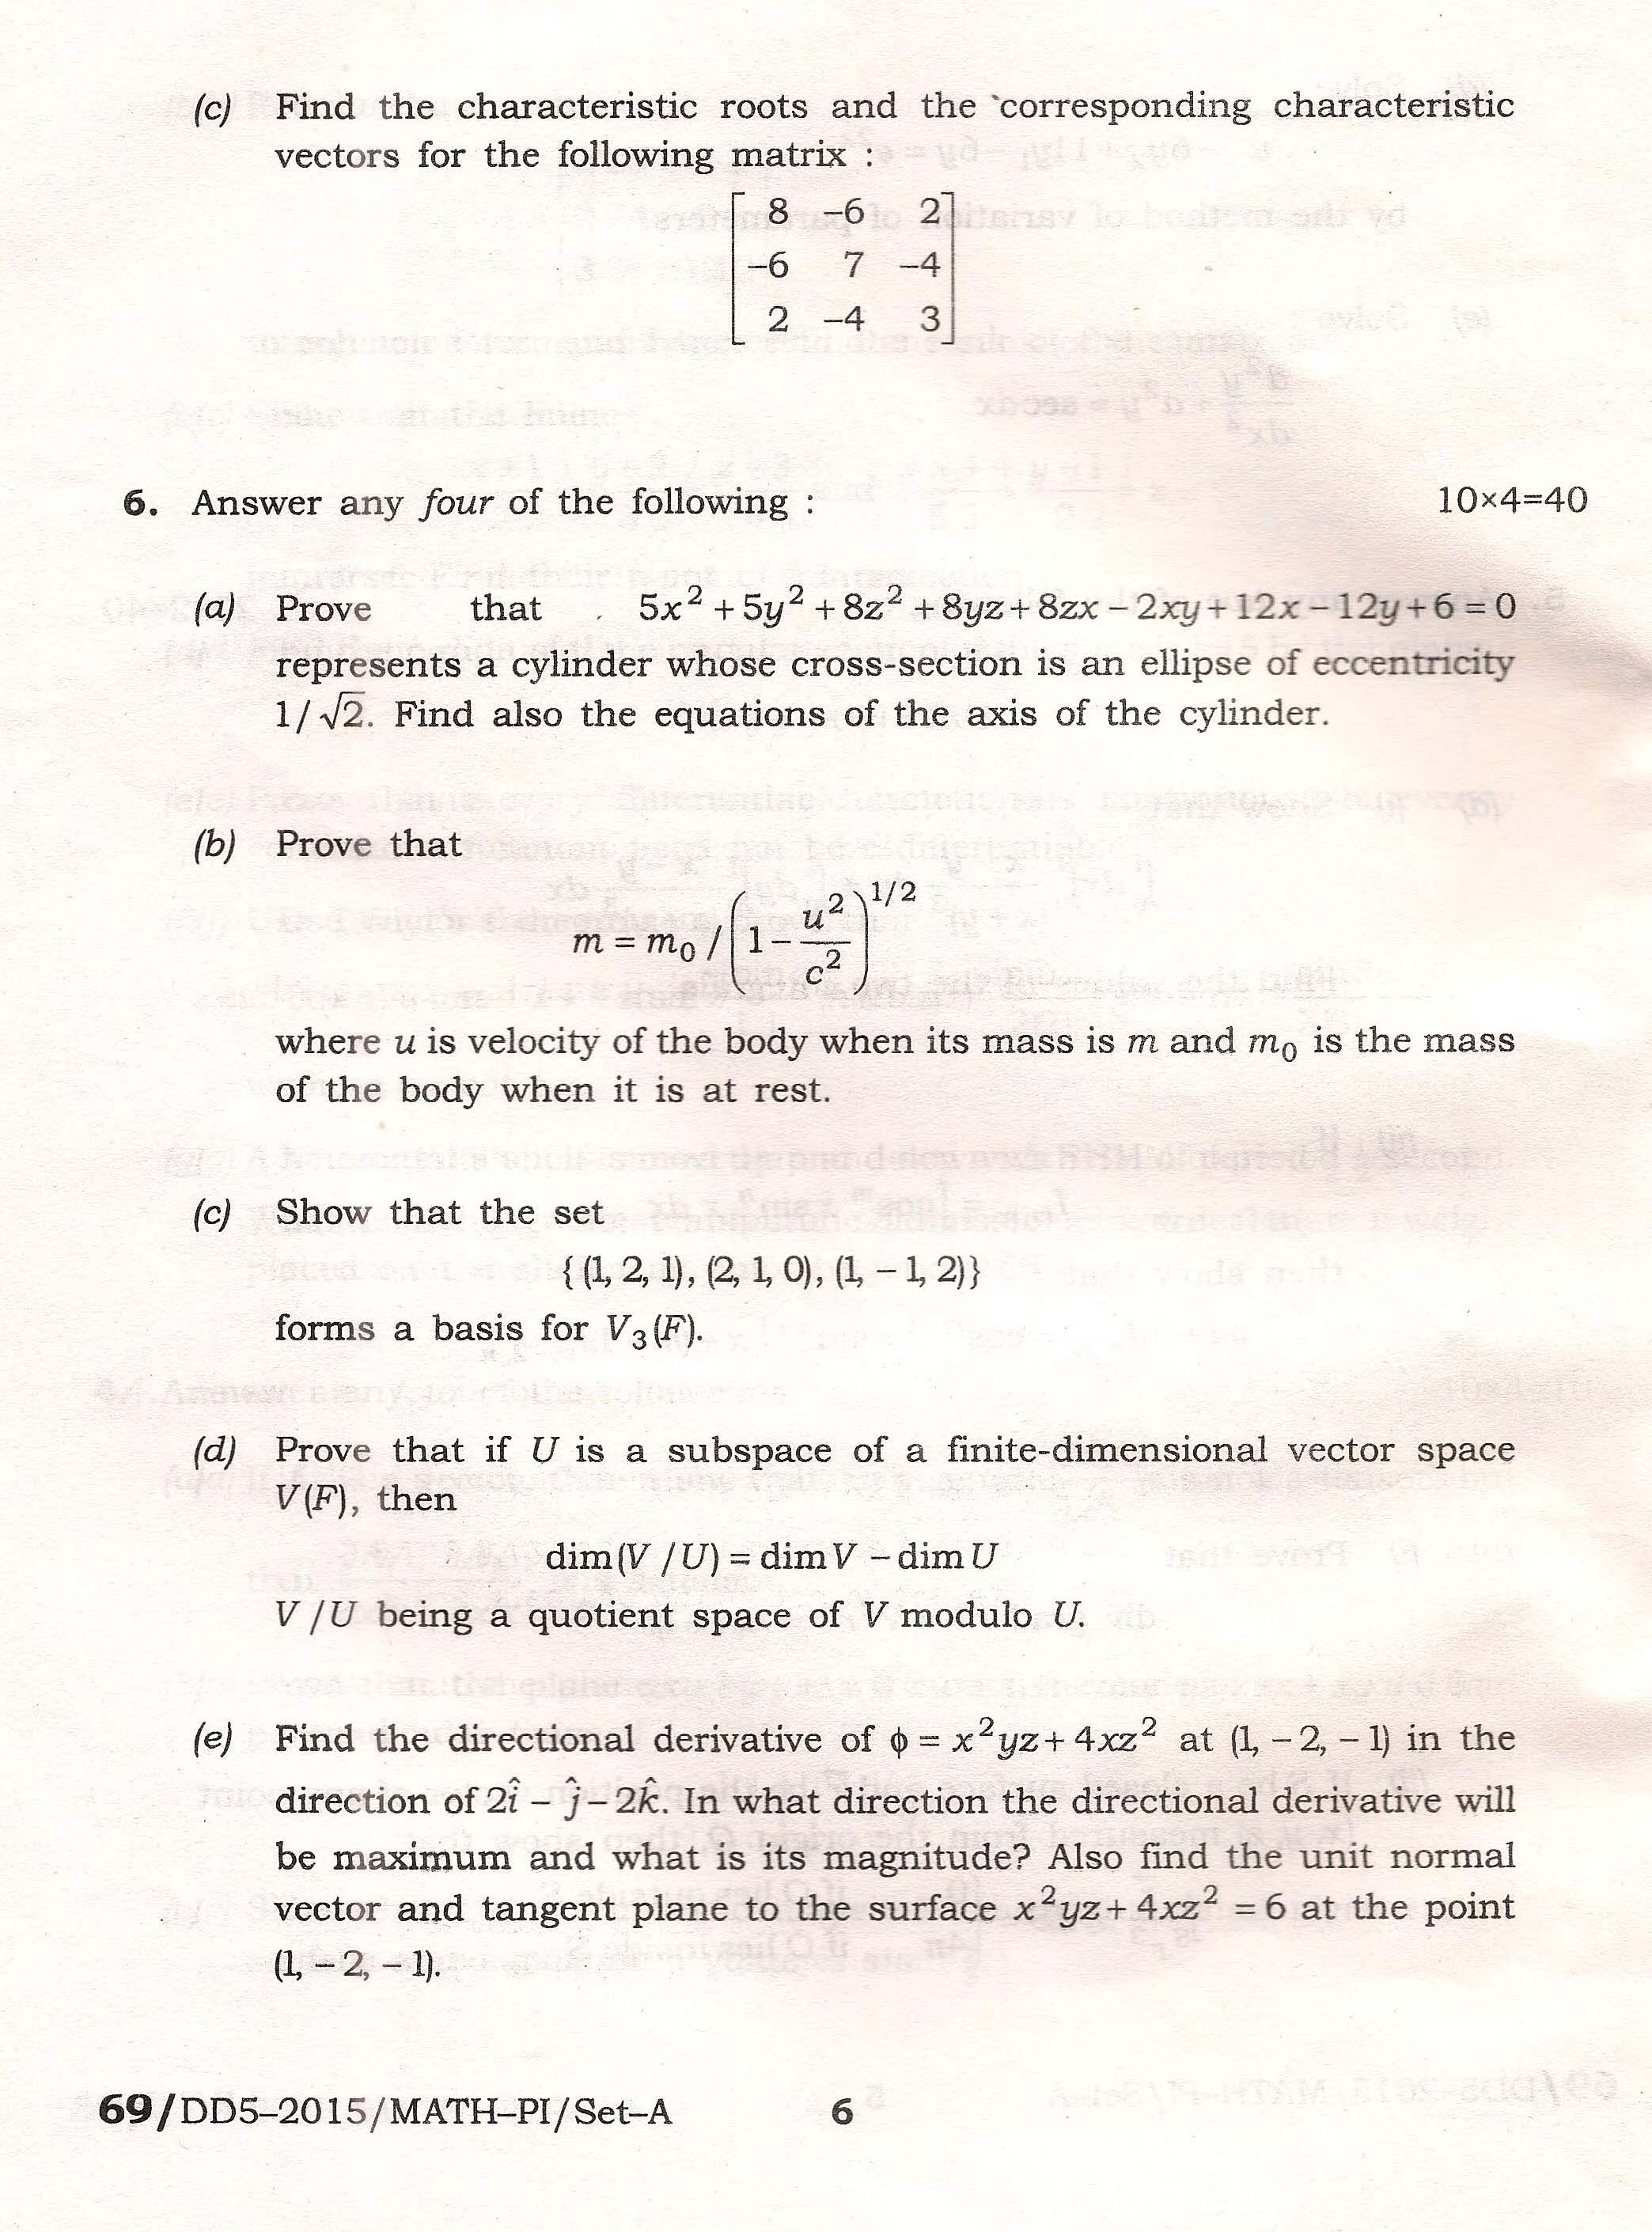 APPSC Combined Competitive Main Exam 2015 Mathematics Paper I 6